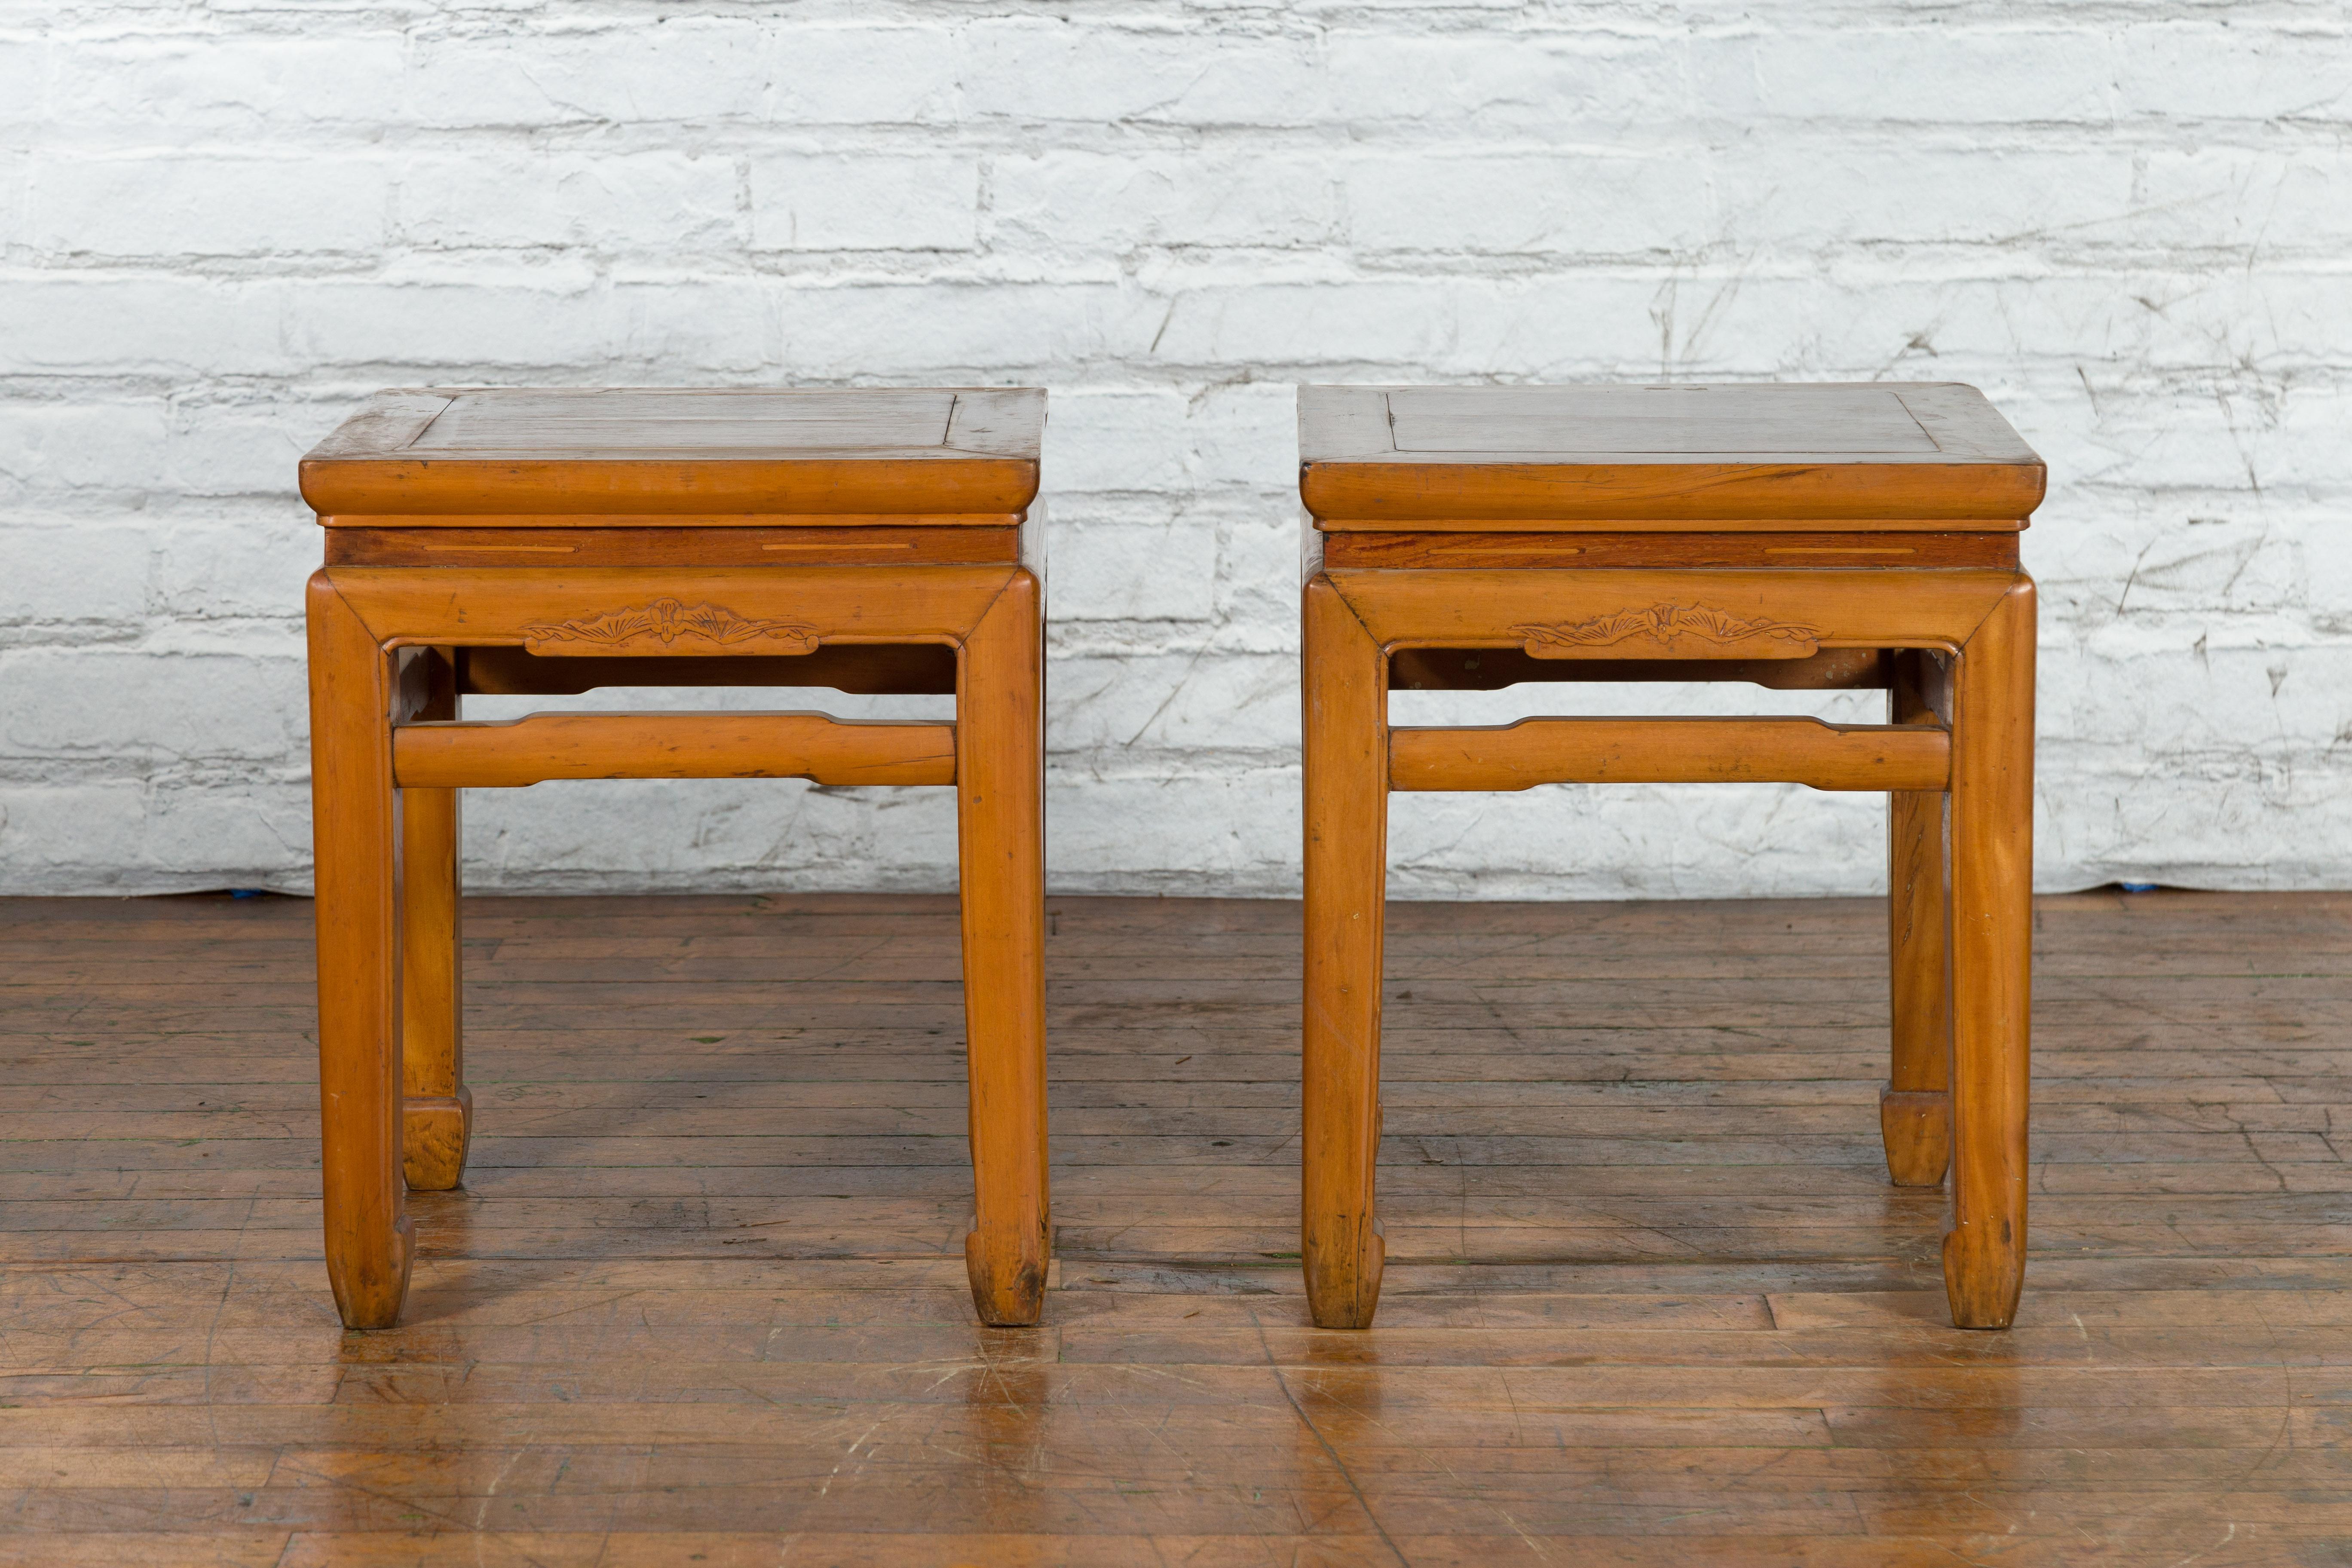 Pair of Vintage Chinese Ming Dynasty Style Waisted Side Tables with Stretchers In Good Condition For Sale In Yonkers, NY